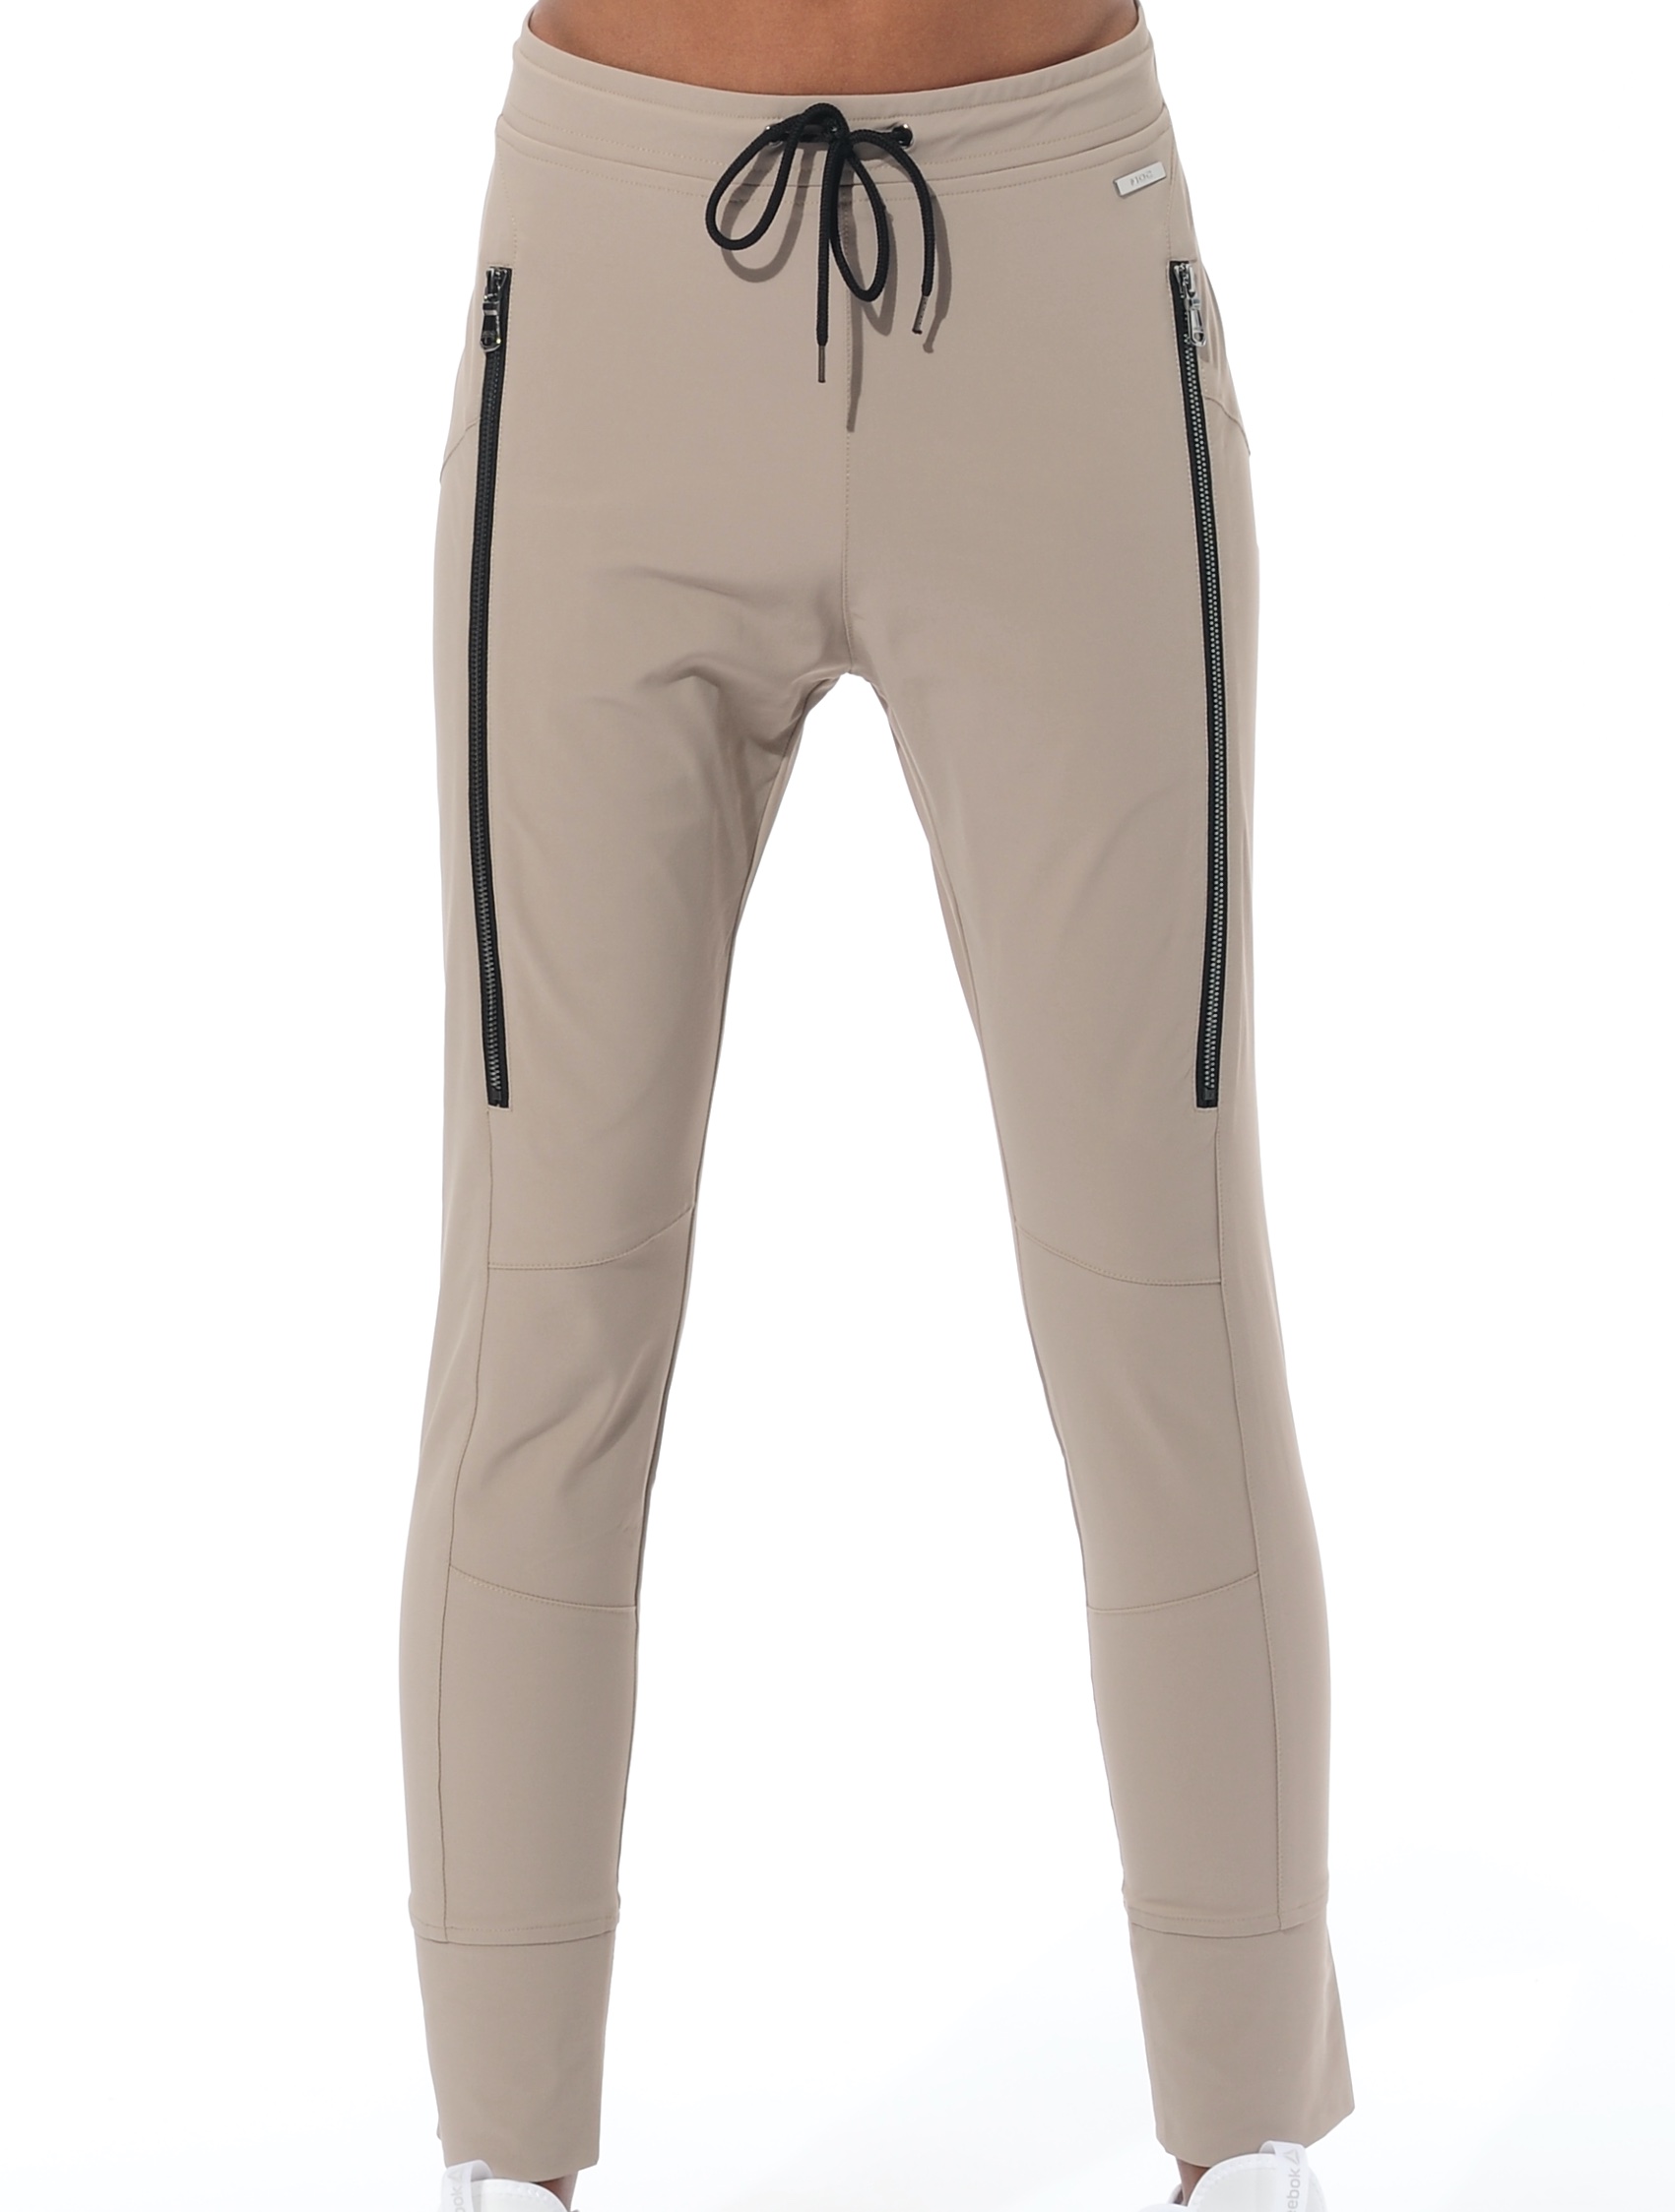 4way stretch jag pants taupe 